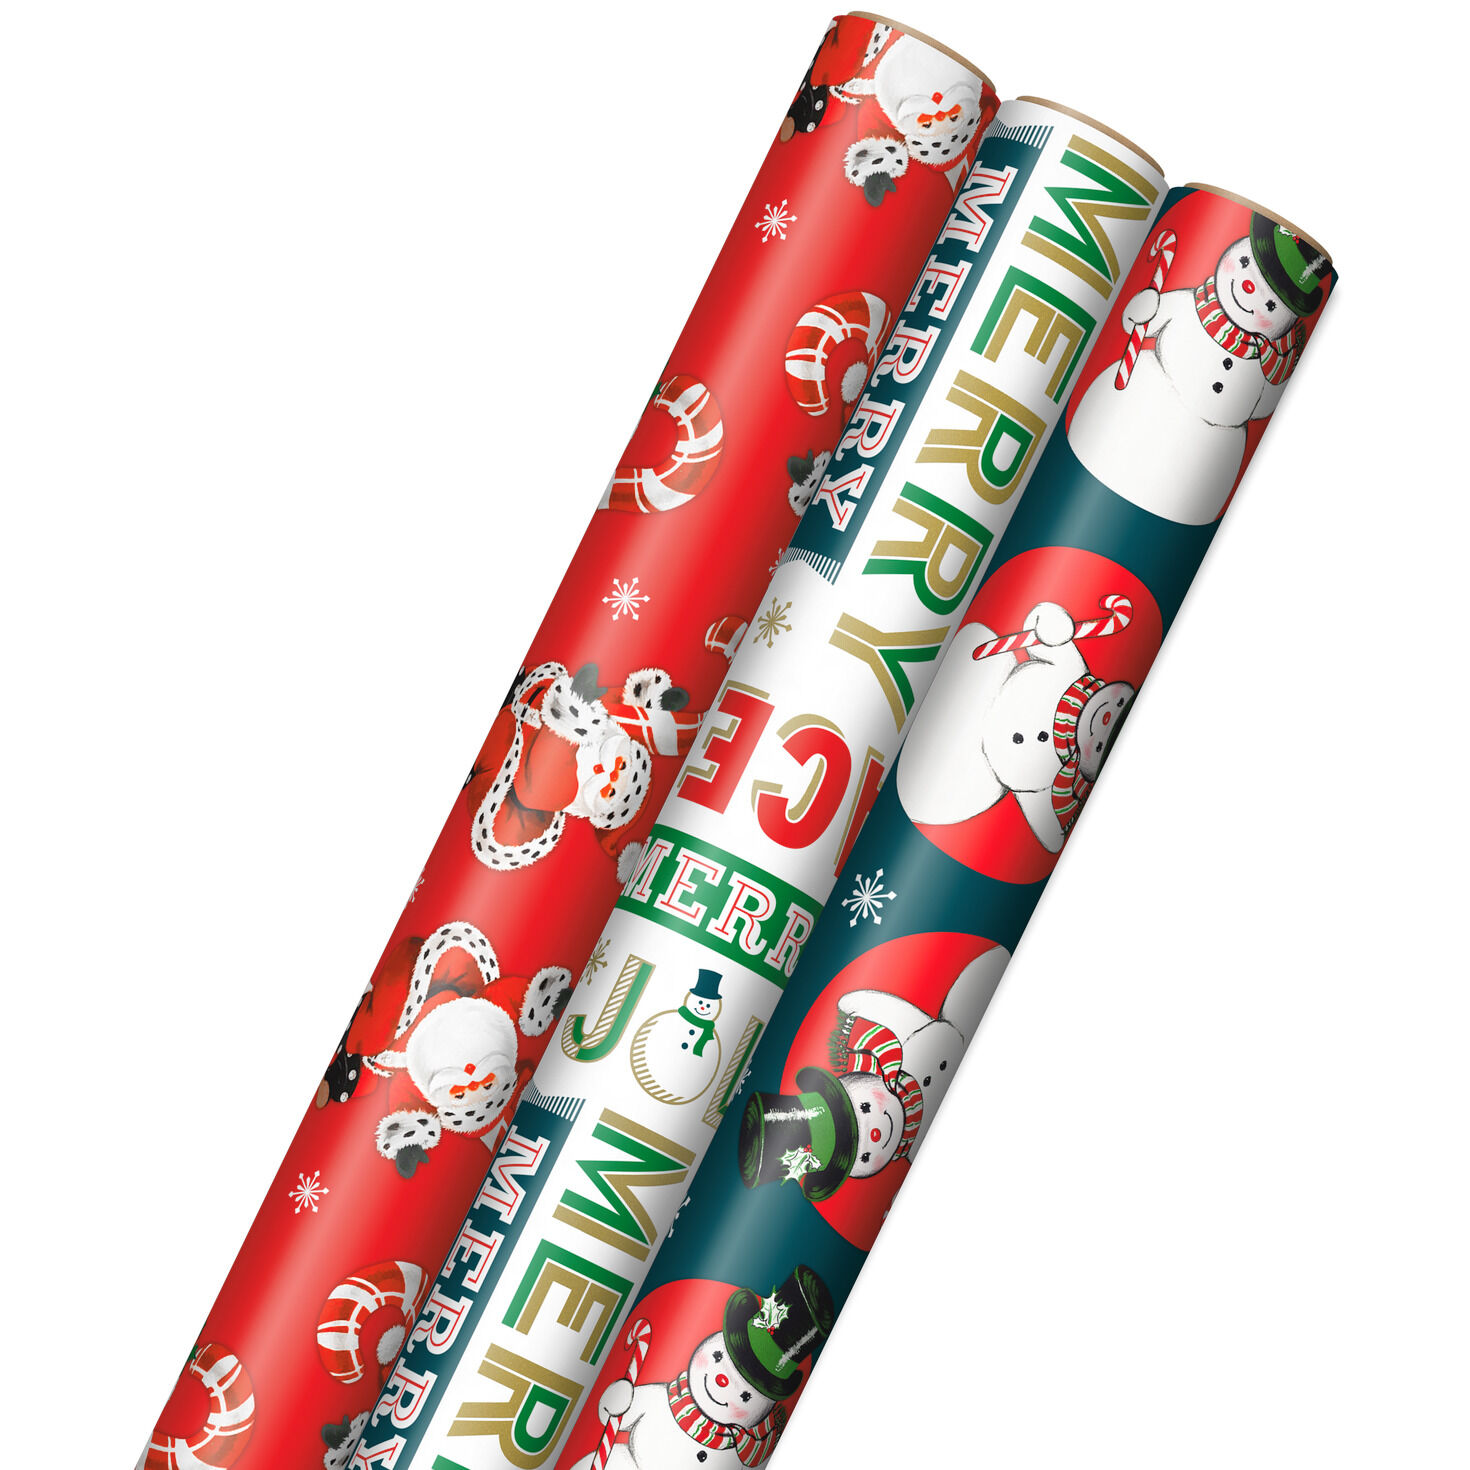 Vintage Christmas Gift Wrapping Paper Rolls Christmas Wrapping